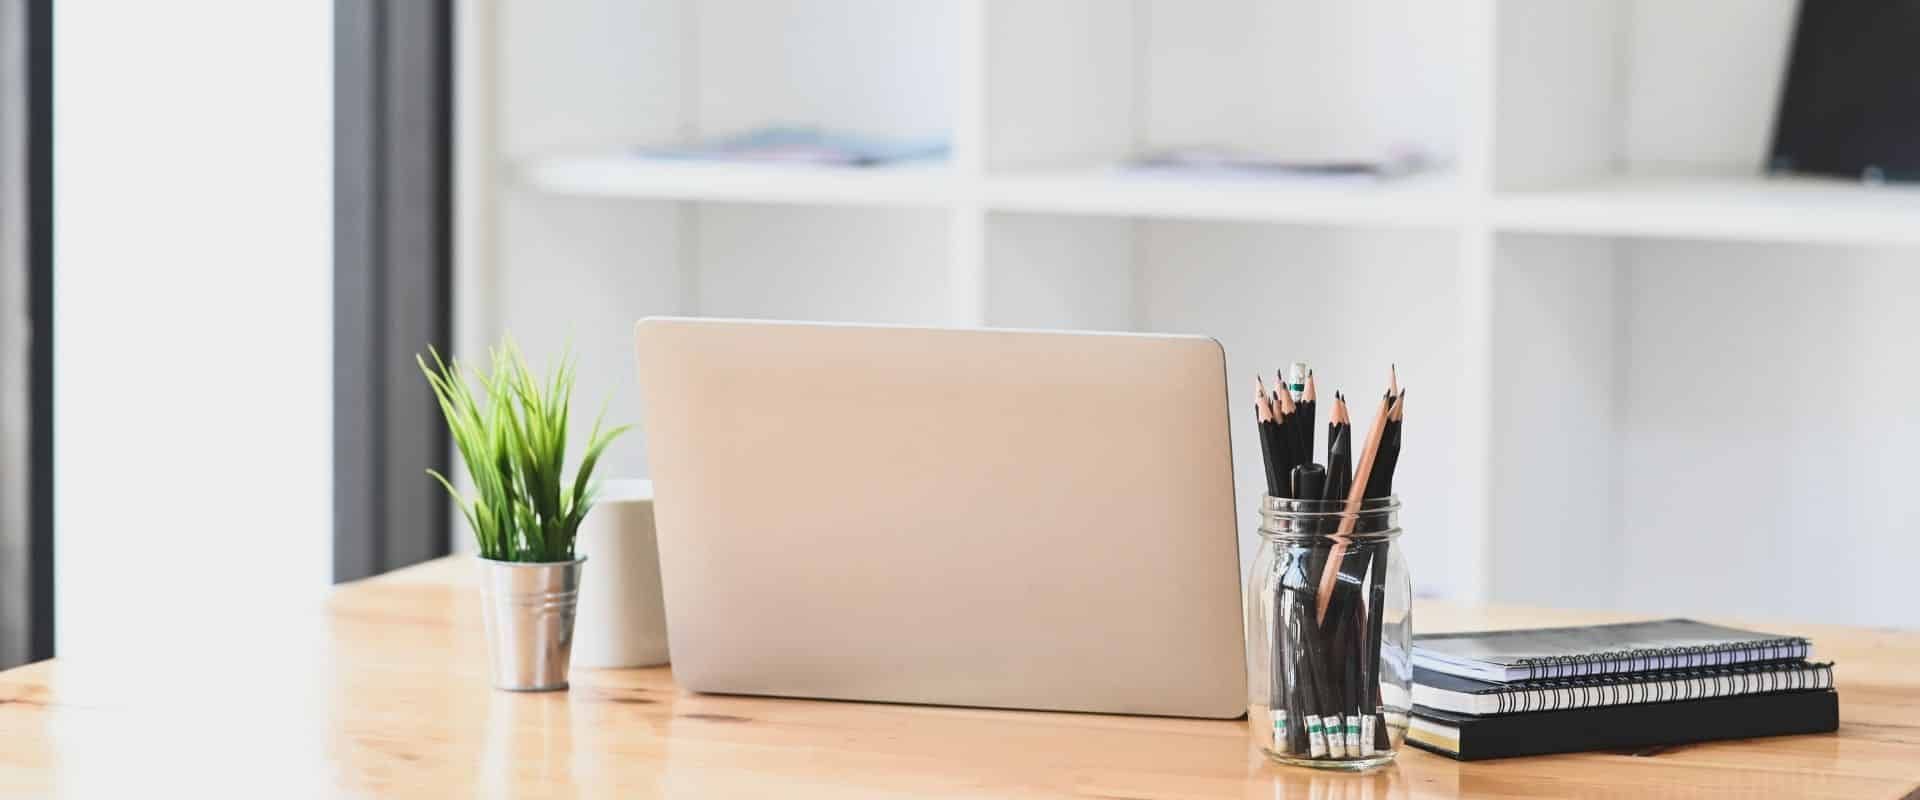 Desk tidy: tips if you’re working from home